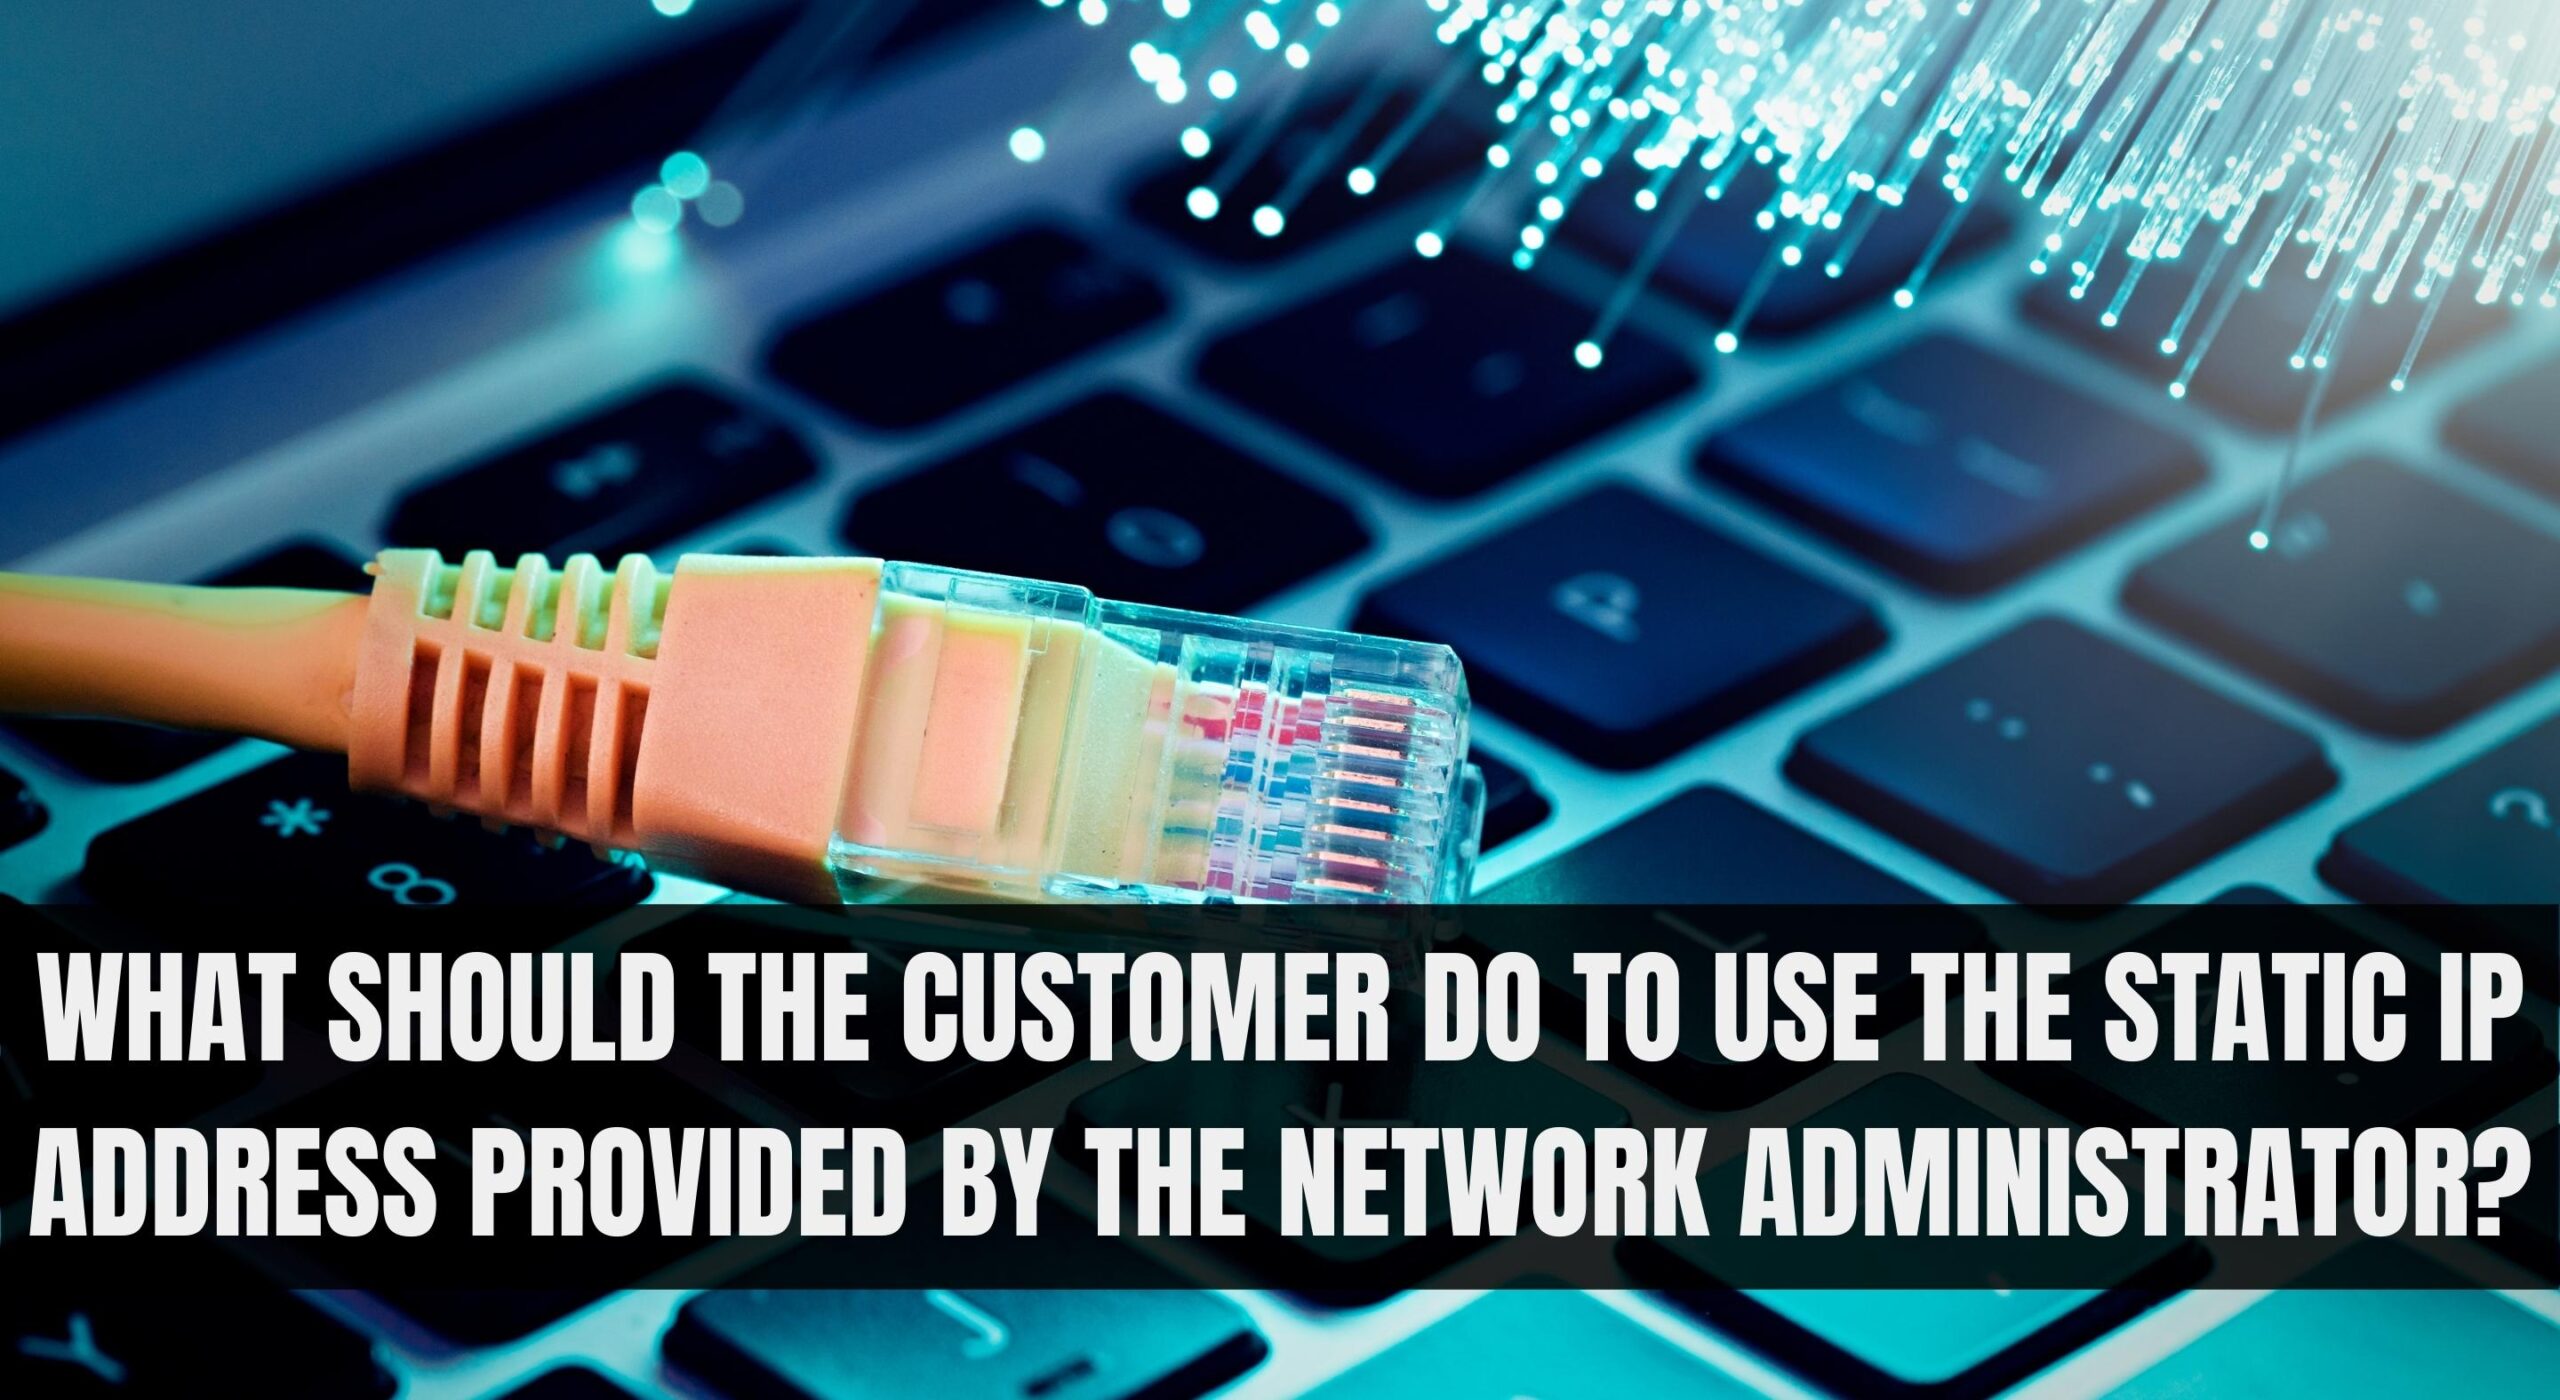 What Should The Customer Do To Use The Static IP Address Provided By The Network Administrator?